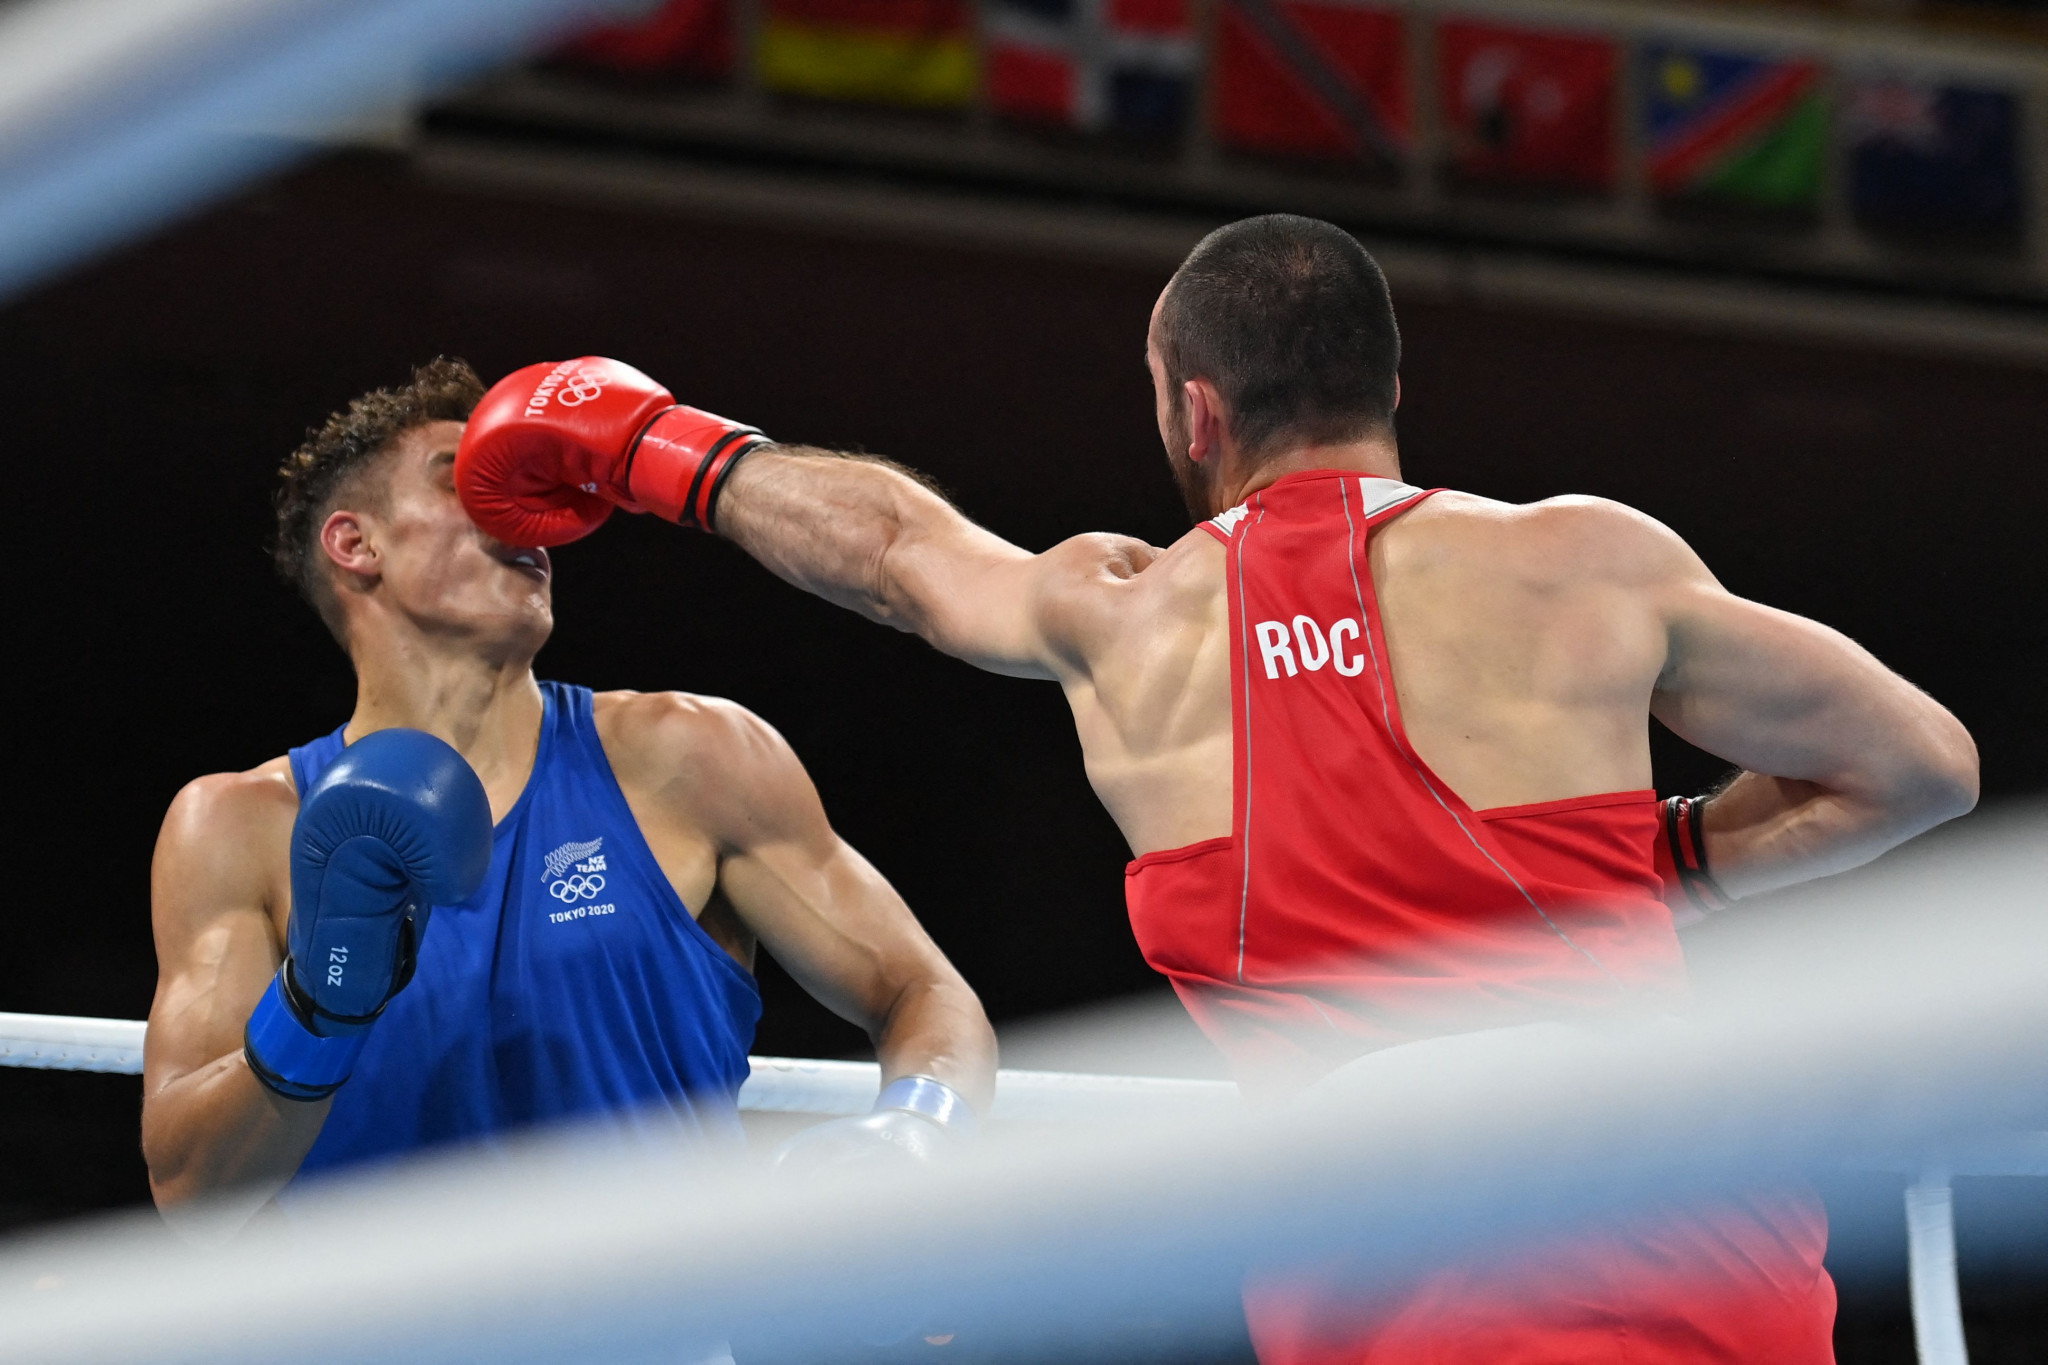 Russian athletes are set to return to international boxing events following the IBA's decision to lift its ban ©Getty Images